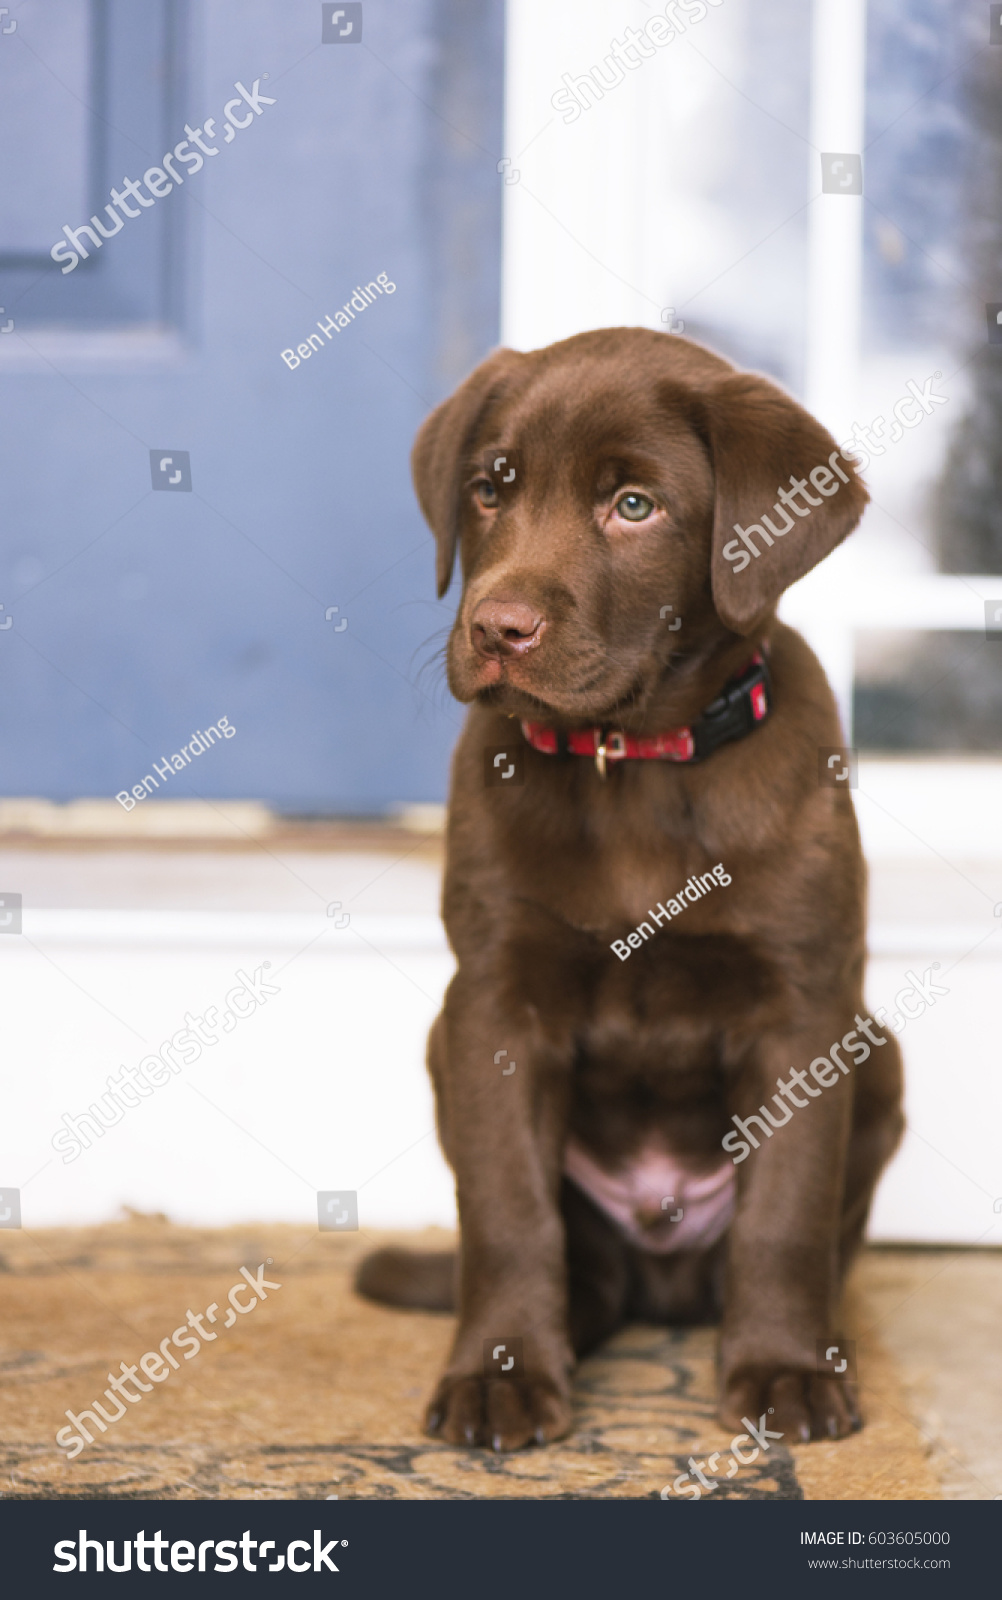 8 Week Old Chocolate Lab Puppy Stock Photo Edit Now 603605000